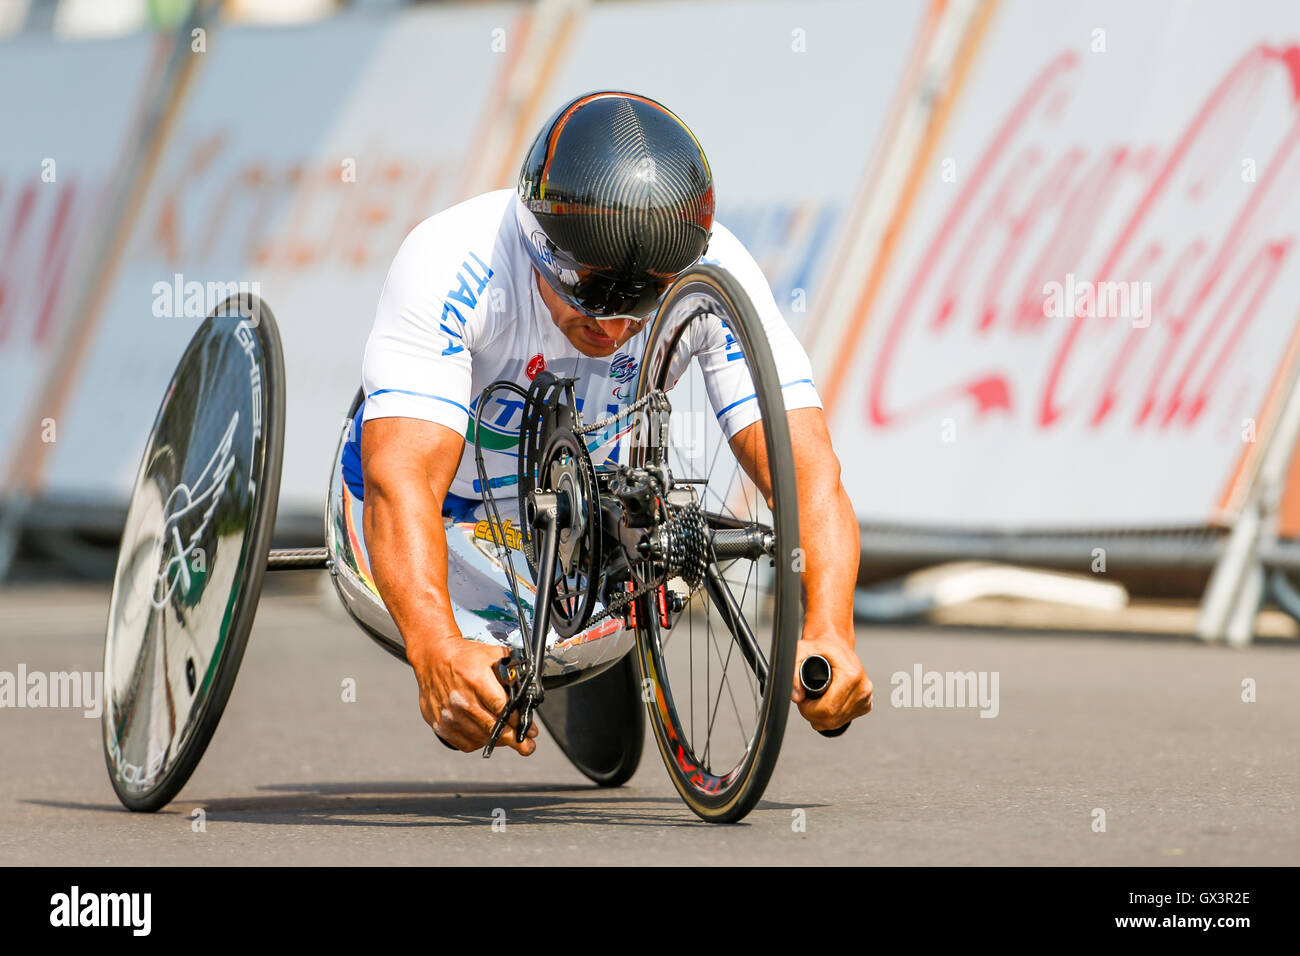 Rio De Janeiro, Brazil. 14th Sep, 2016. Alex Zanardi in action during the first day of para-cycling road in the time trial H5, Rio de Janeiro in Brazil. © Mauro Ujetto/Pacific Press/Alamy Live News Stock Photo